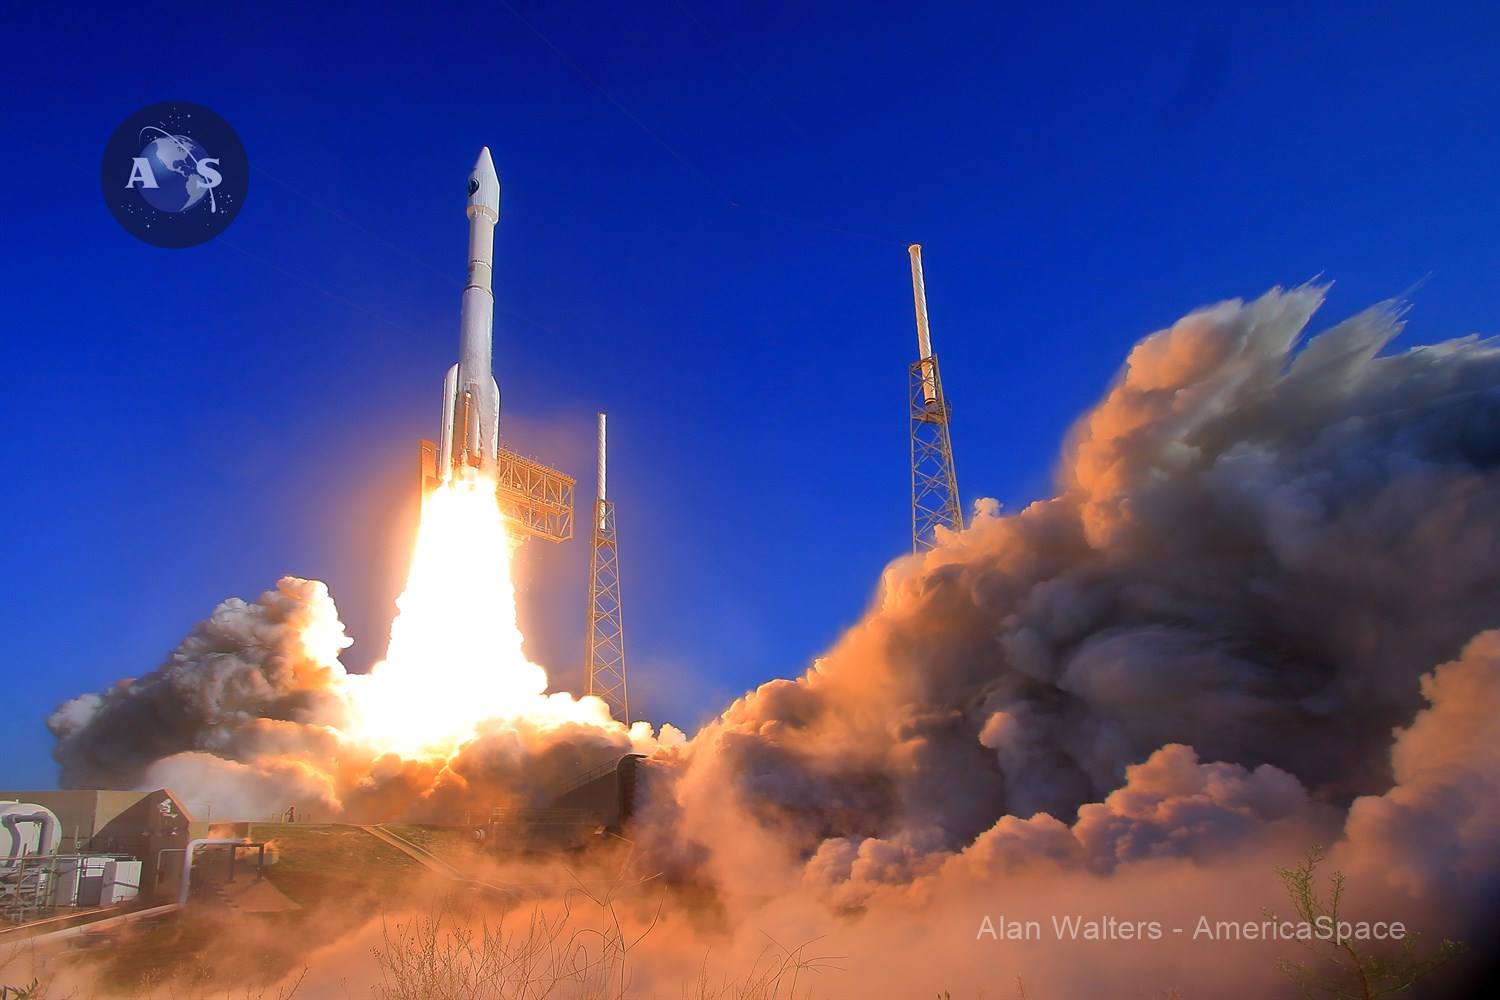 A ULA Atlas-V 421 rocket launching the classified NRO-61 satellite from Cape Canaveral, FL July 28, 2016. Photo Credit: Alan Walters / AmericaSpace